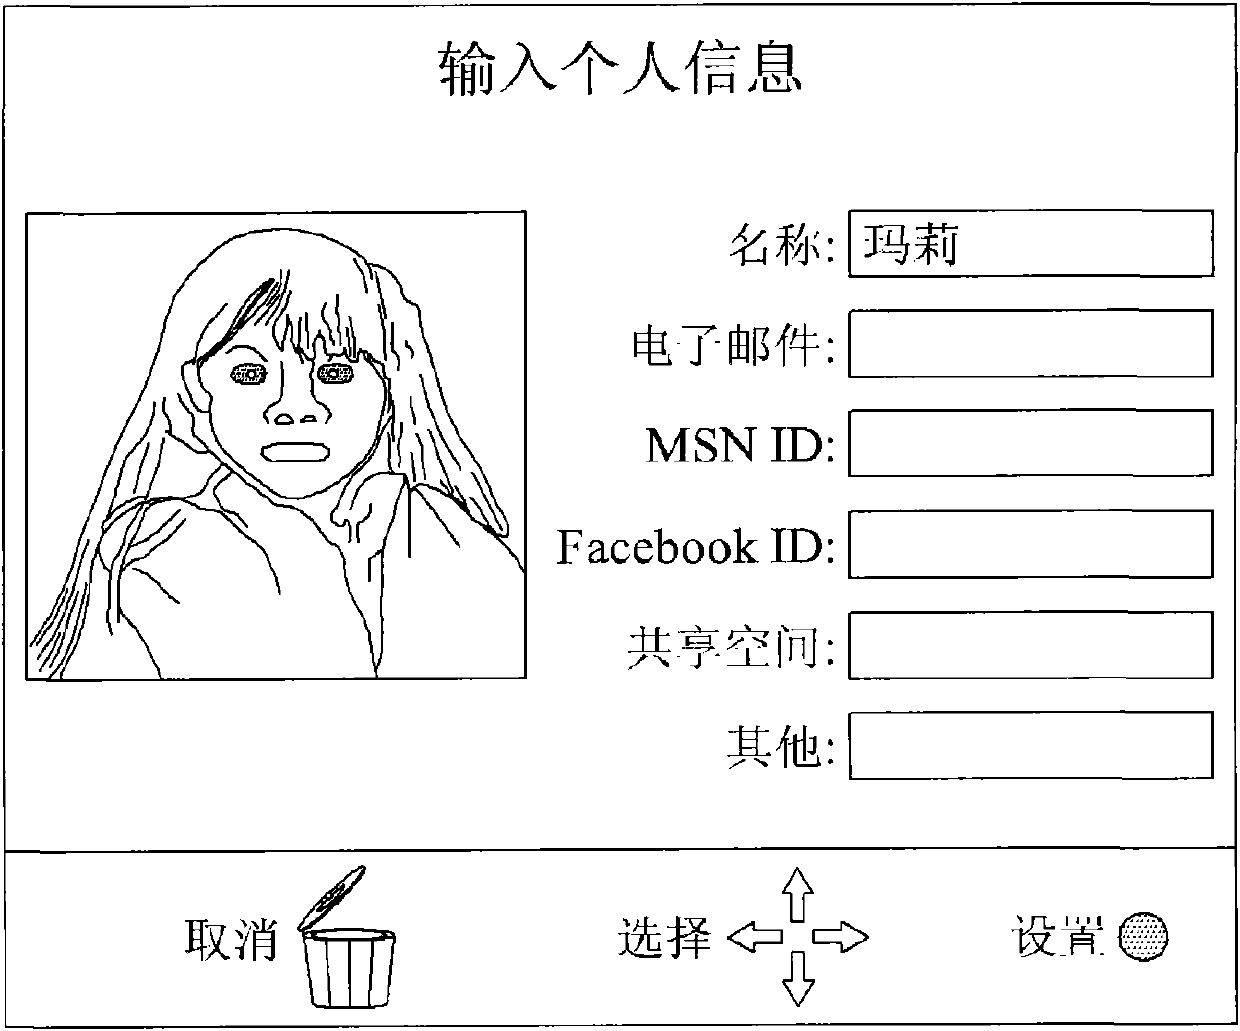 Picture sharing methods for portable device